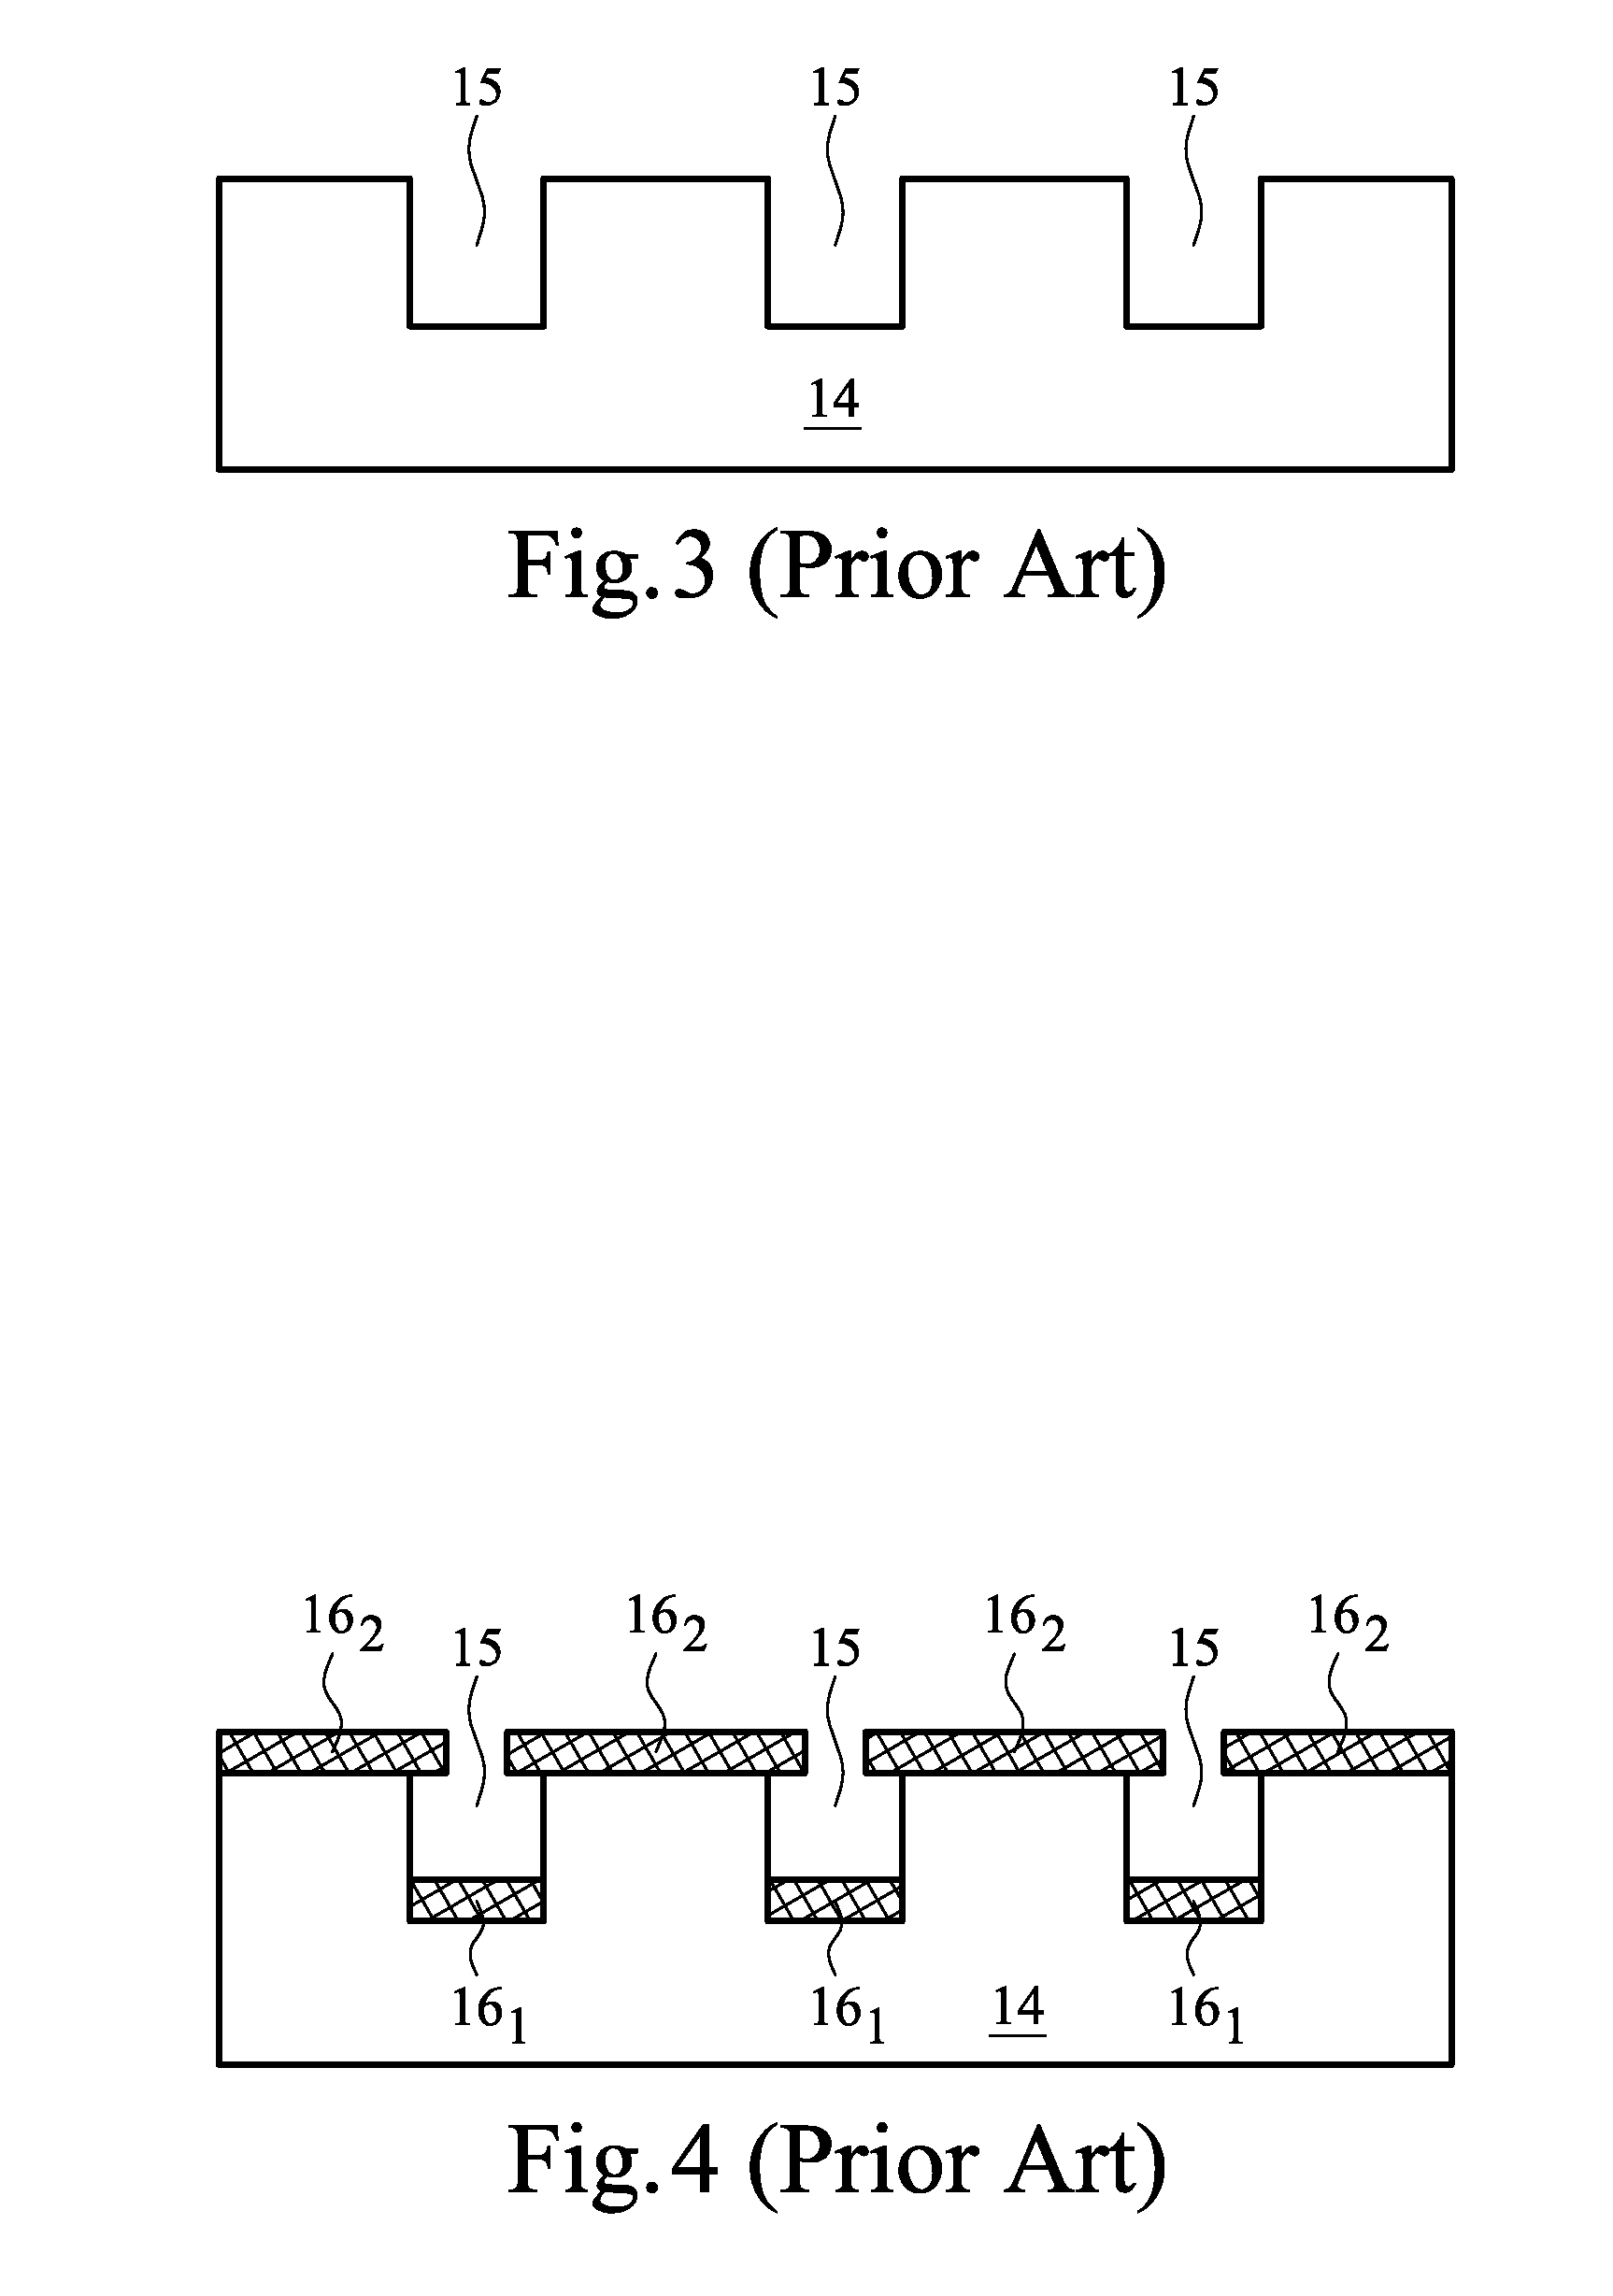 III-V Compound Semiconductor Epitaxy From a Non-III-V Substrate